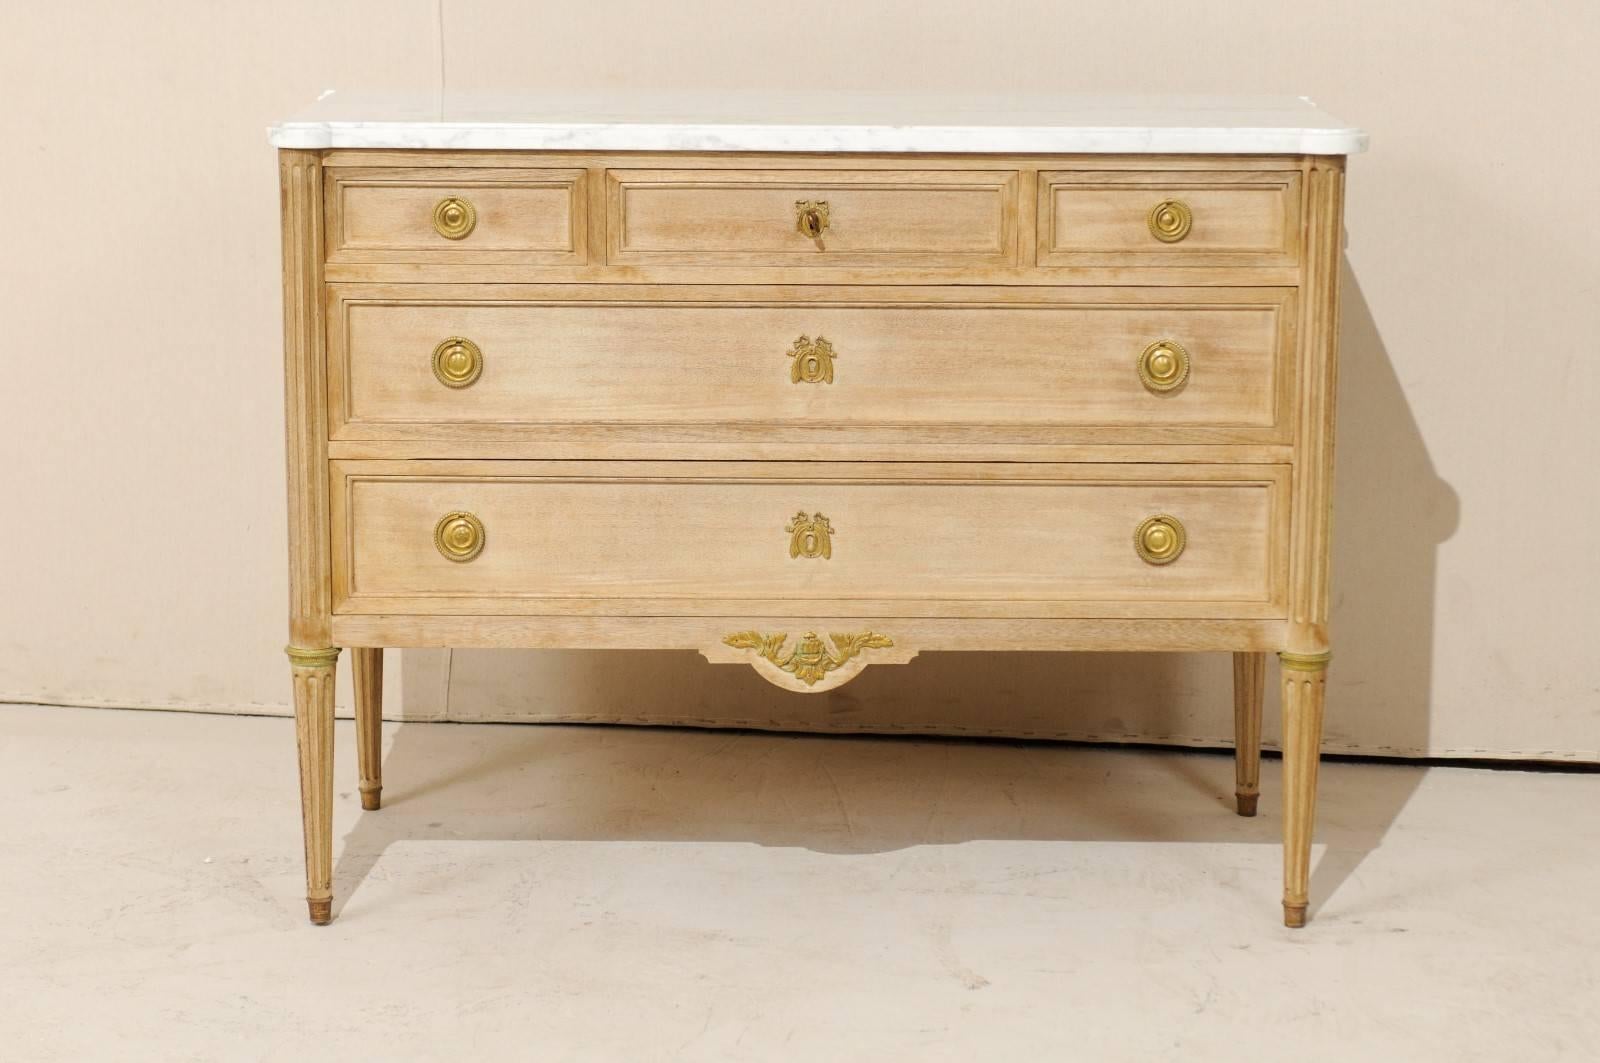 A French marble-top chest. This French chest of bleached mahogany from the mid-20th century features three small top drawers over two larger drawers and a white marble top with gray veining. The marble top is slightly overhung and has protruded